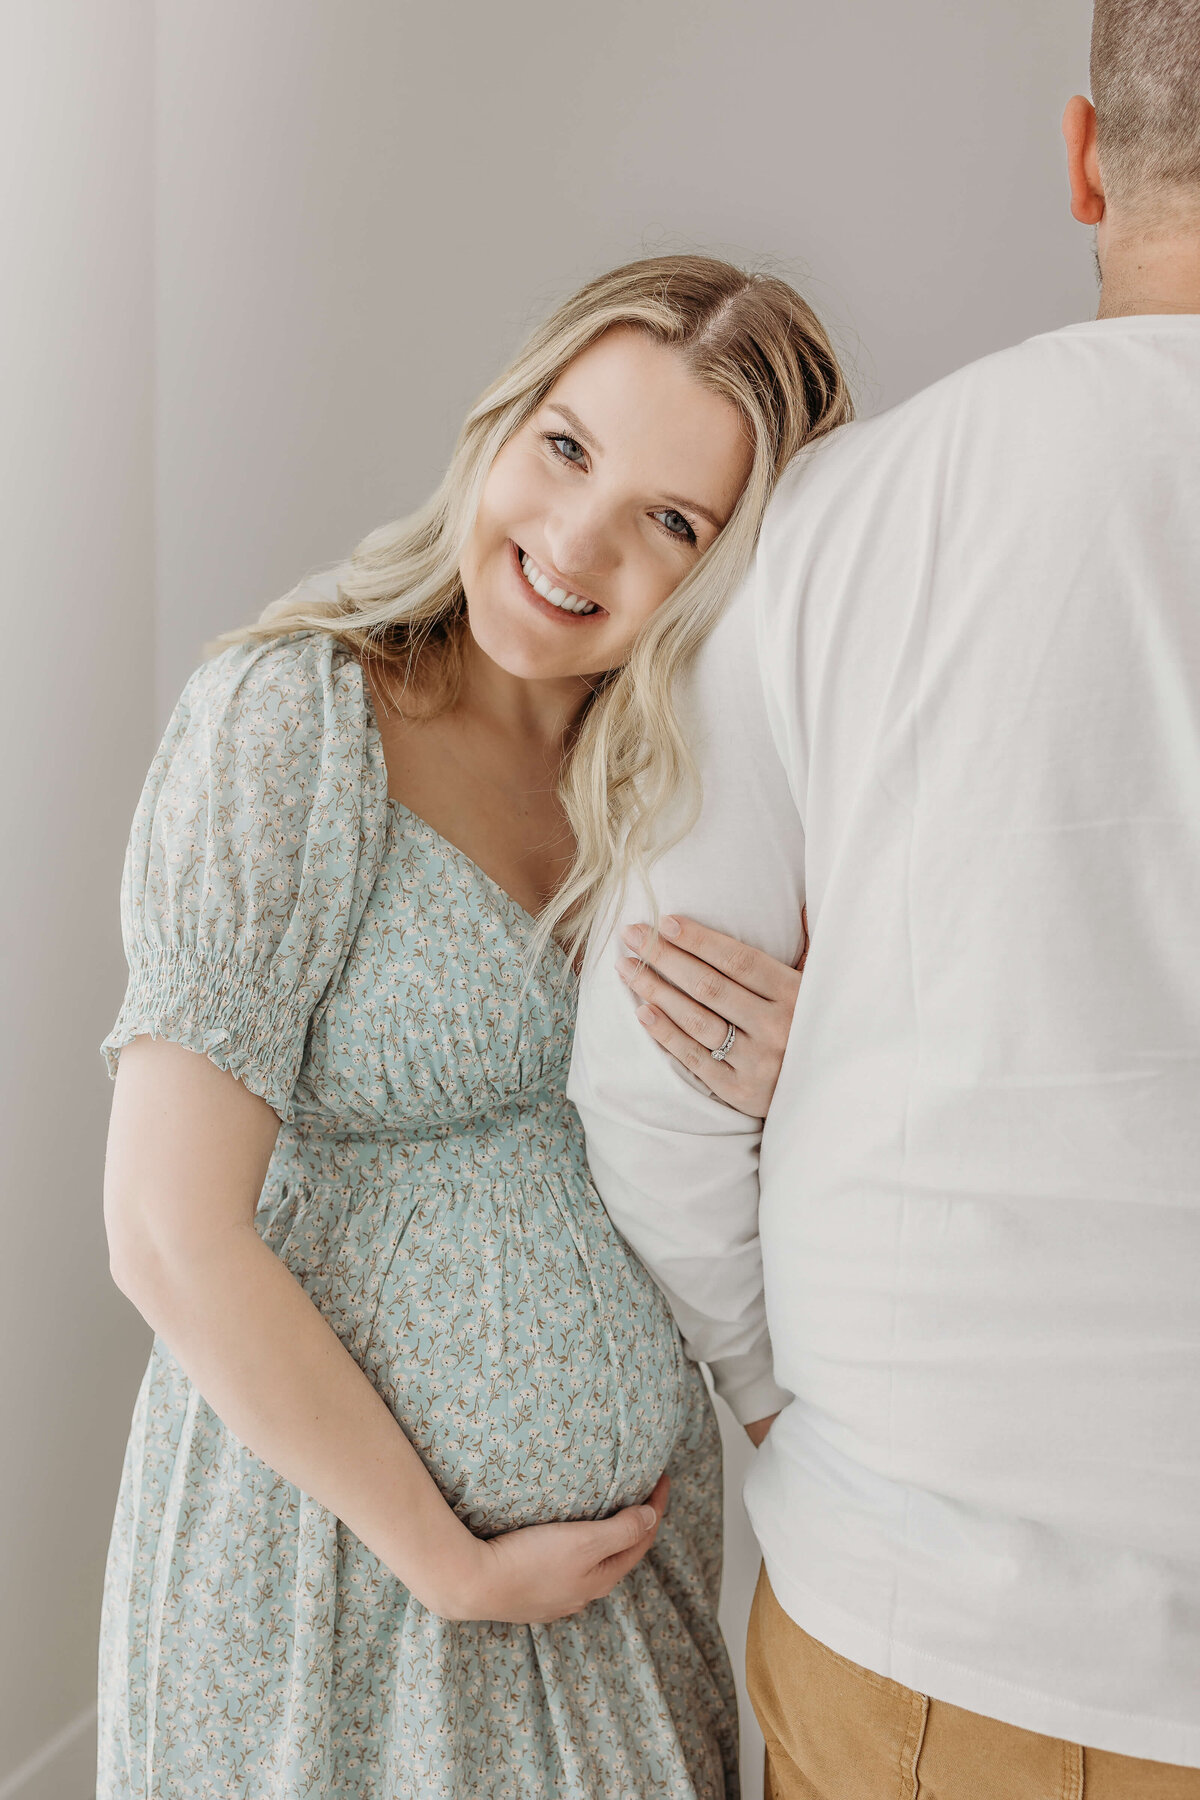 Expecting mom holding husband's arm and smiling for camera